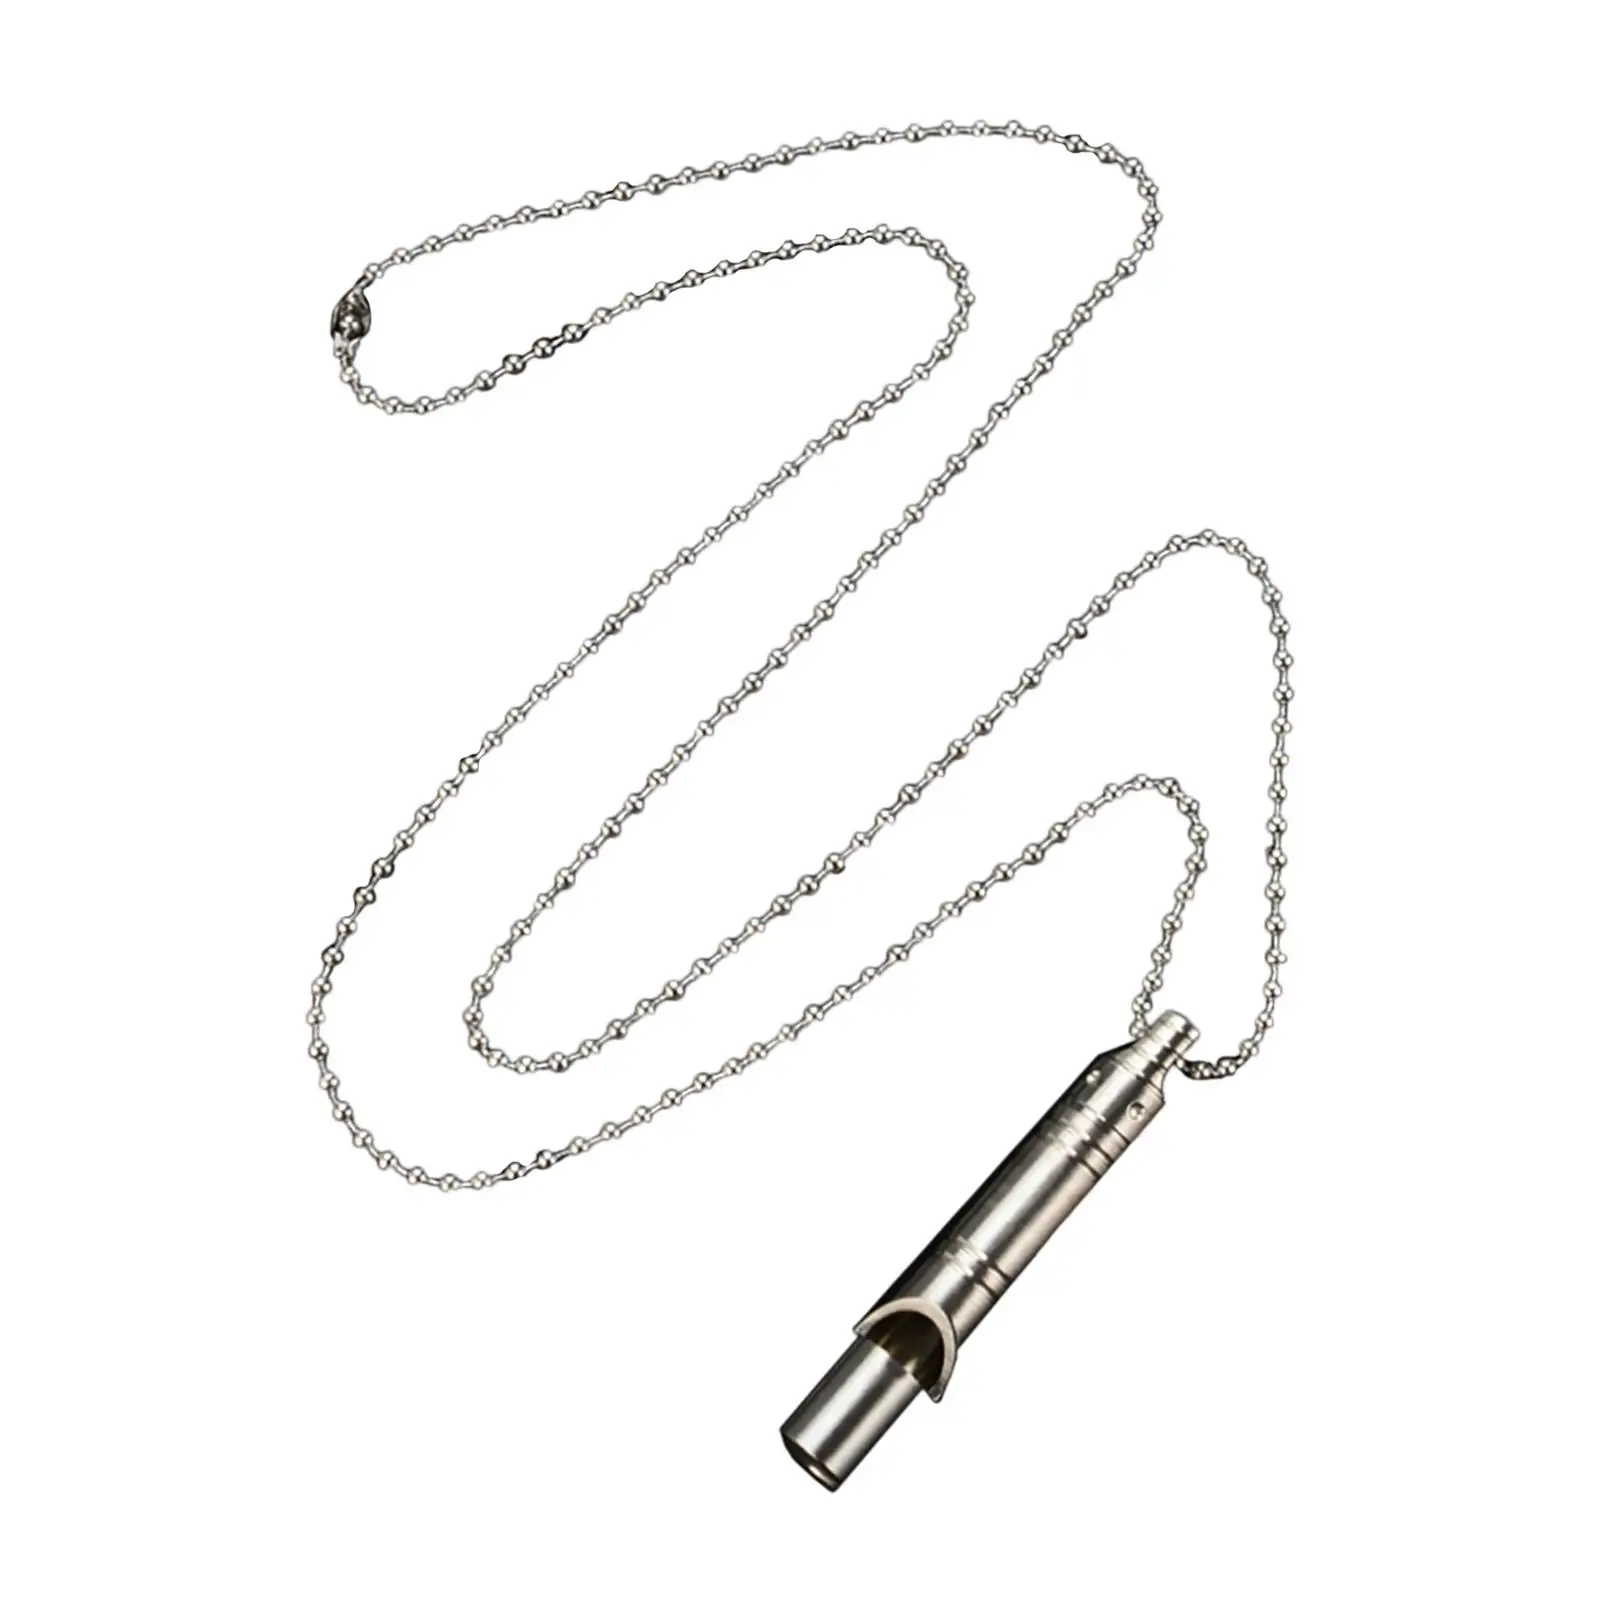 Survival Whistles Dog Training with Long Chain Outdoor Necklace Whistle for Camping Fishing Sports Emergency Boating